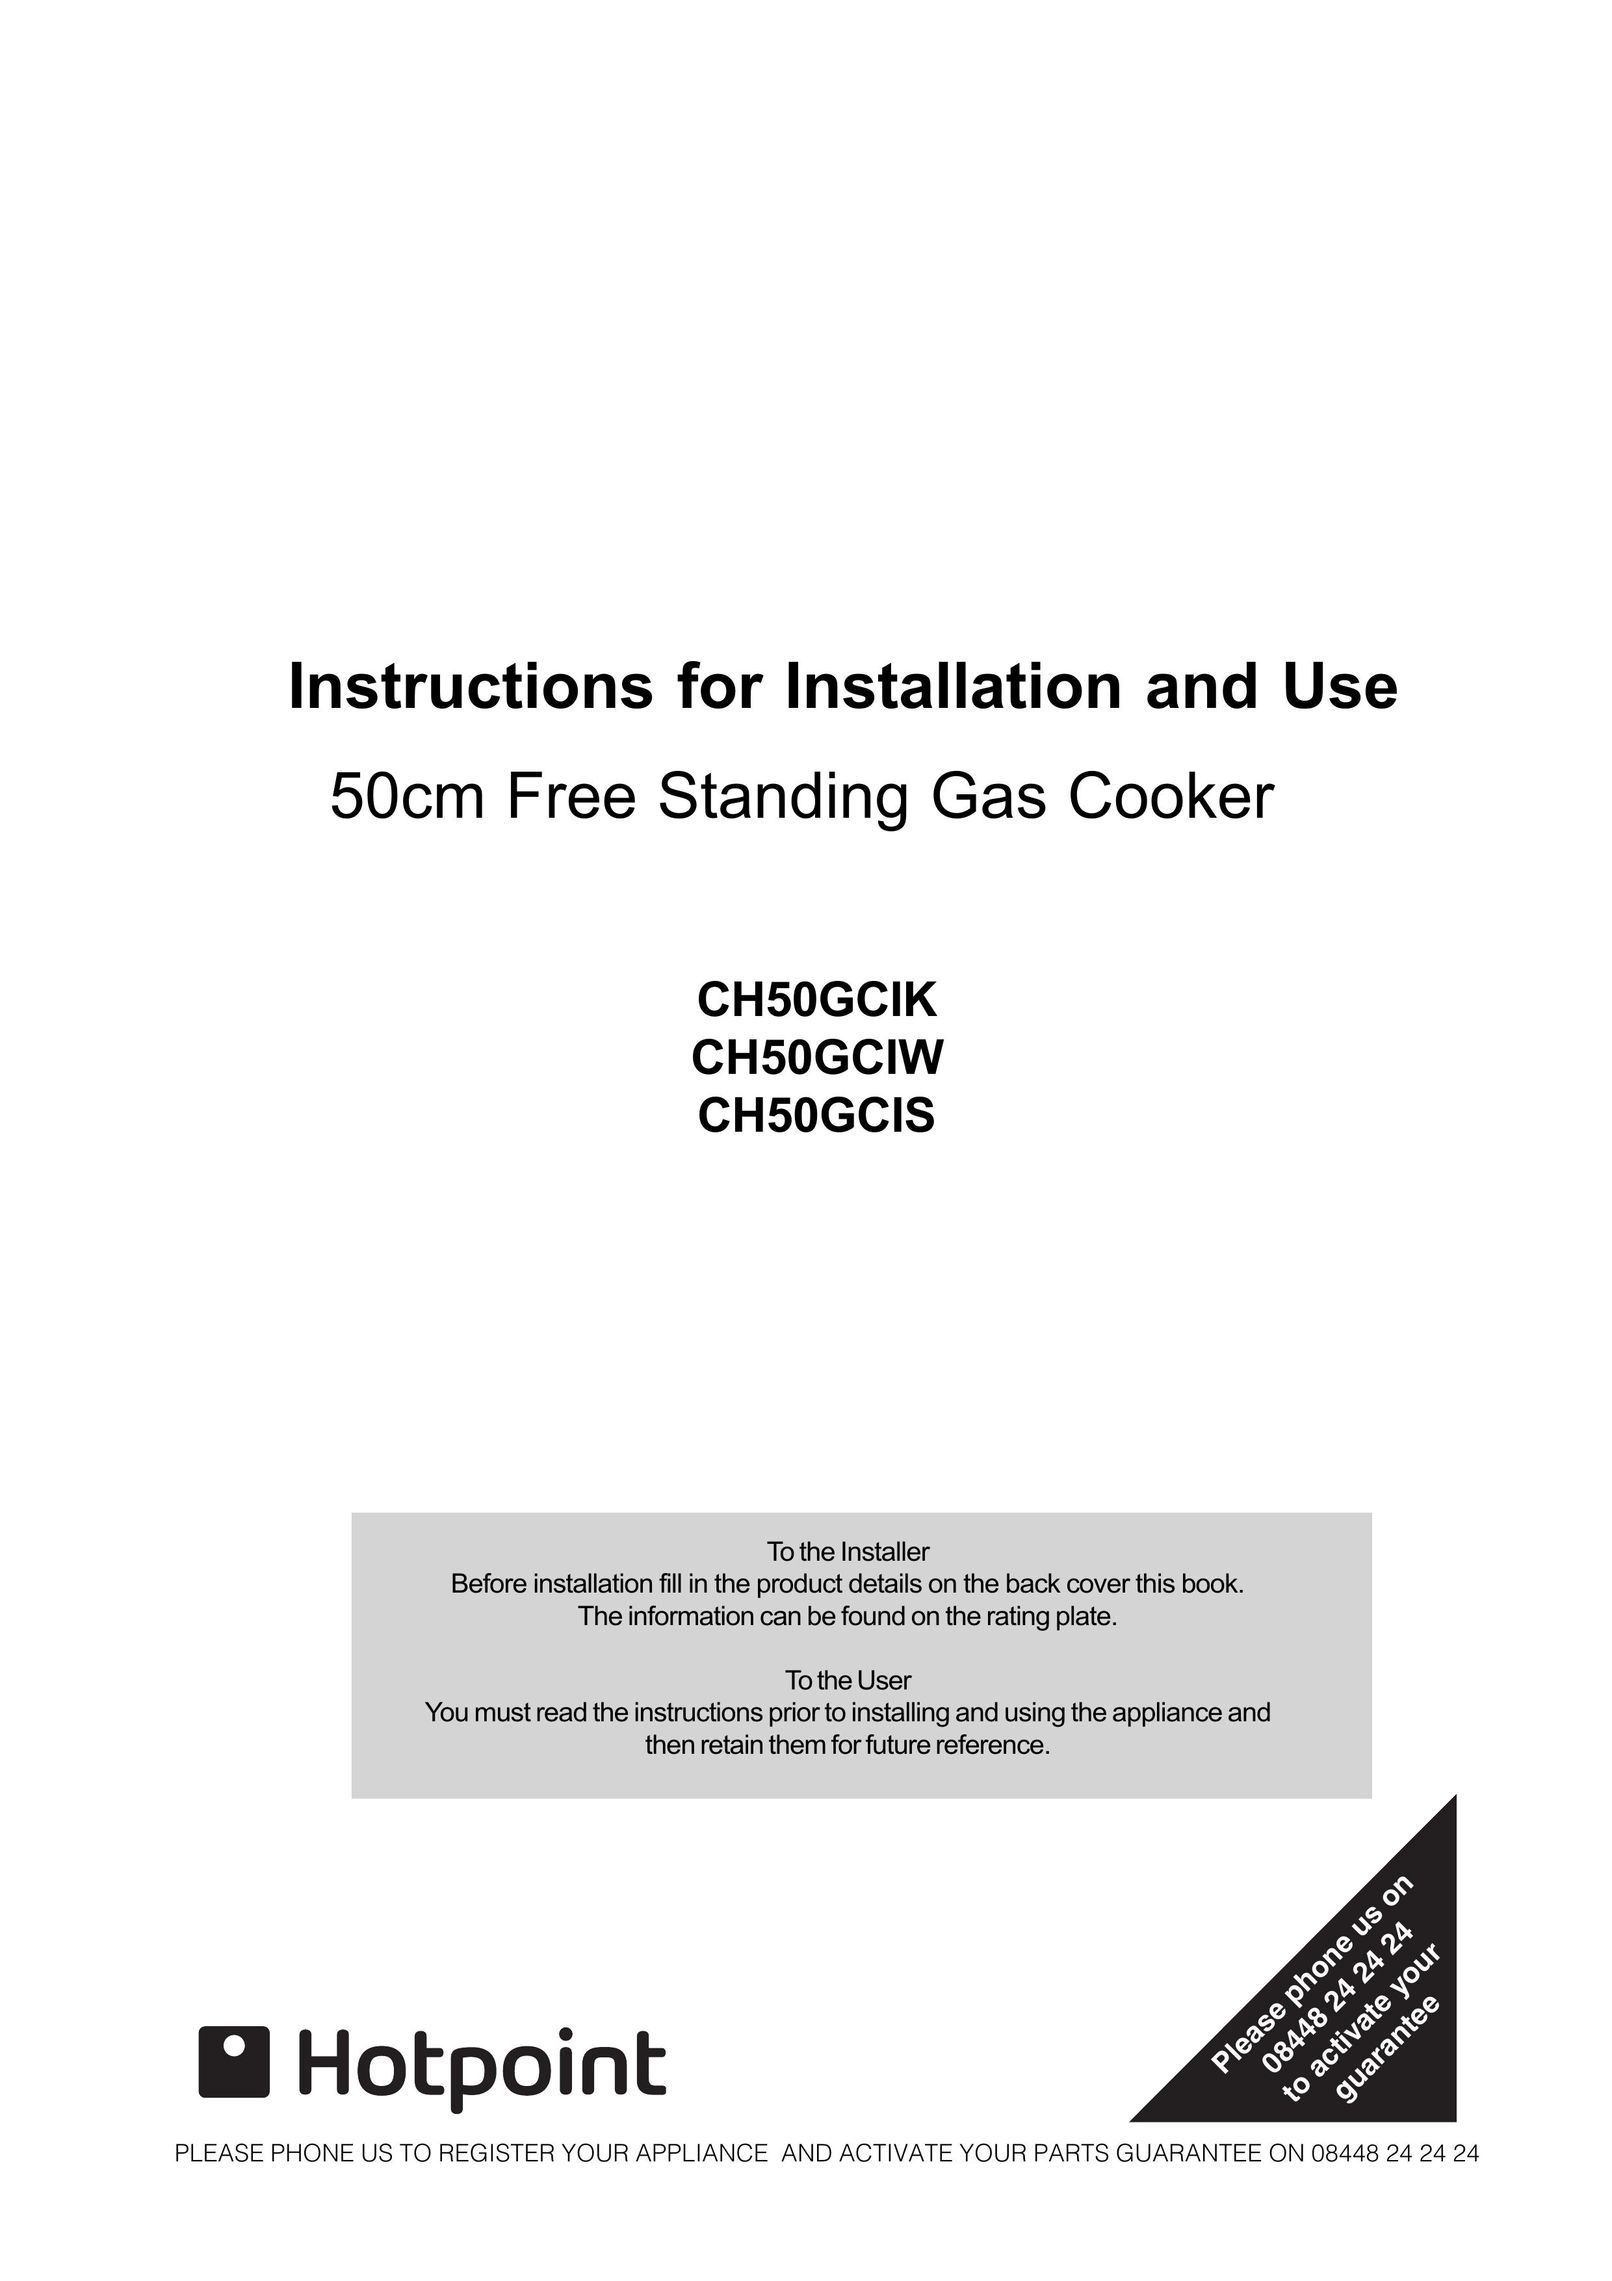 Hotpoint CH50GCIW Stove User Manual